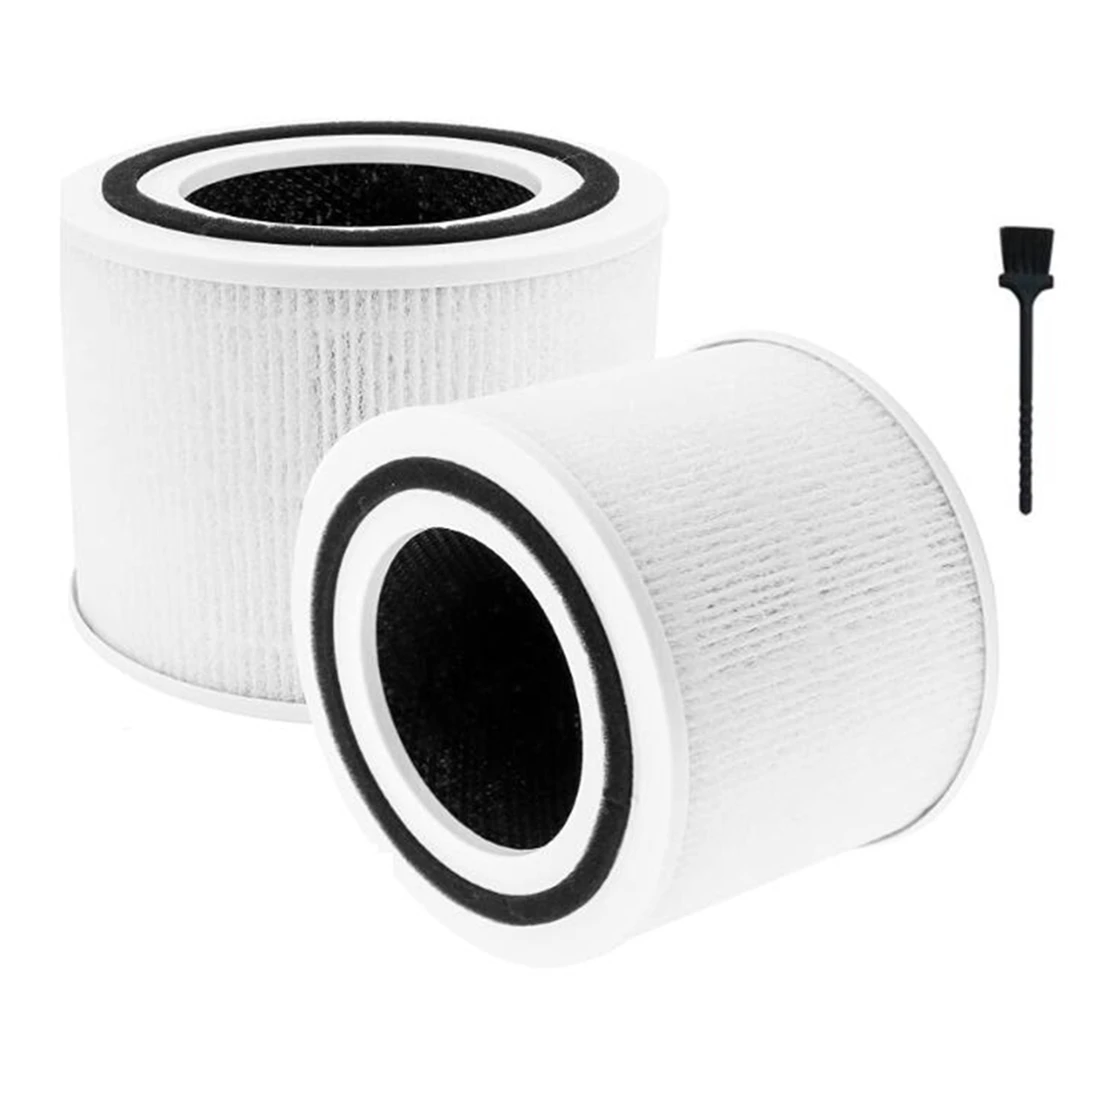 

2Pcs Replacement Filter for LEVOIT Core P350/P350-RF Pet Air Purifier,3-In-1 H13 HEPA Filter&Activated Carbon Filter